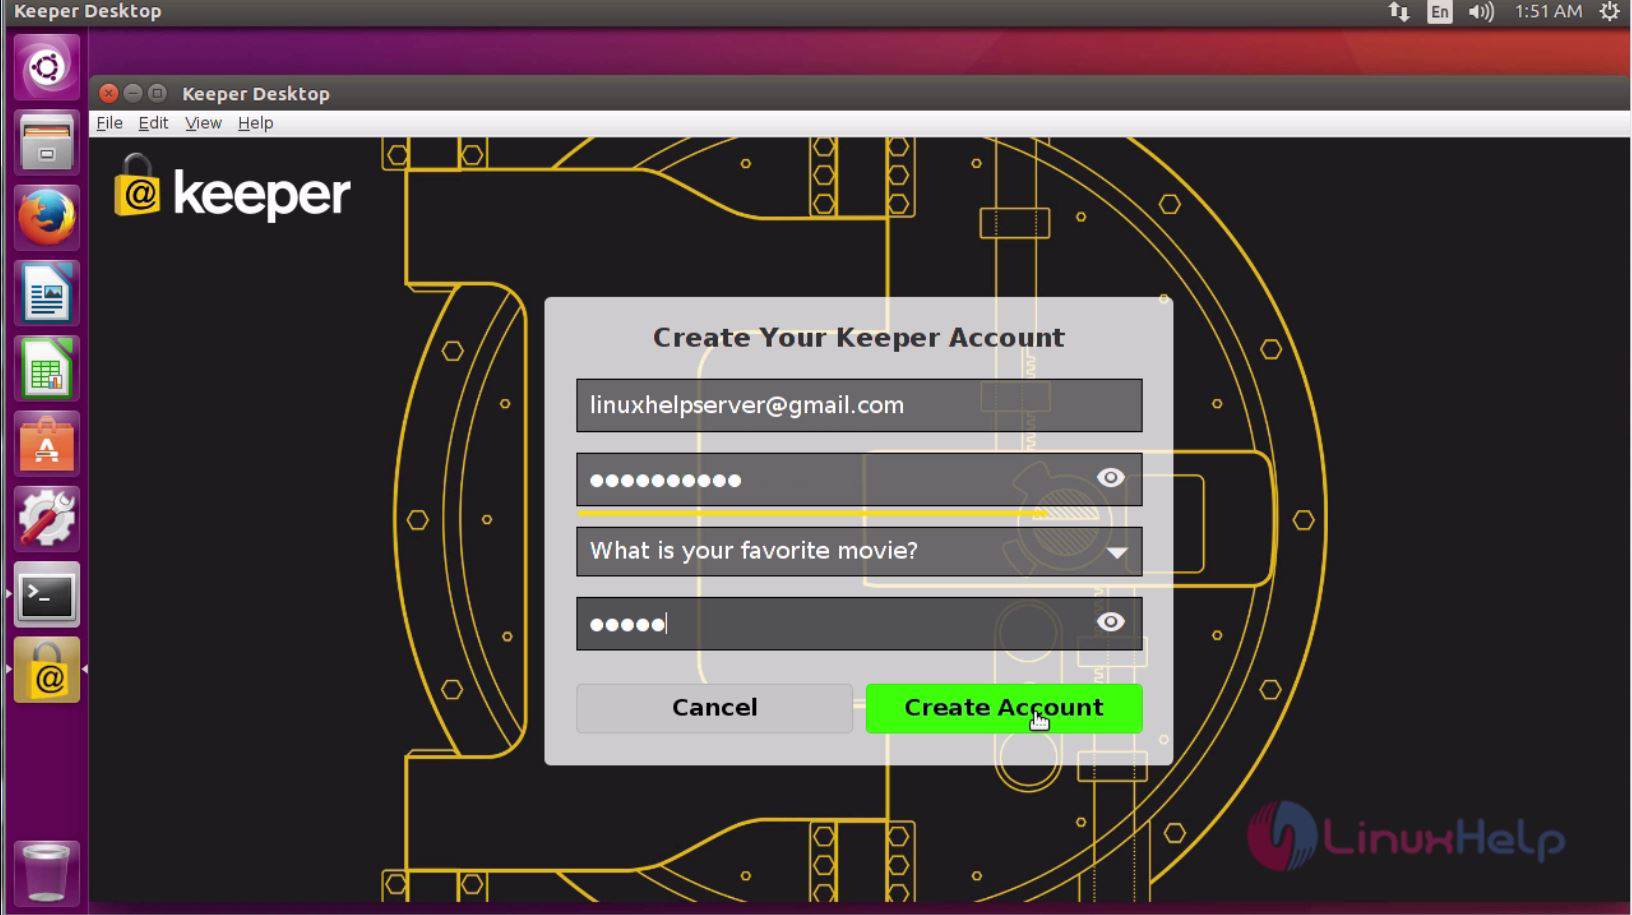 keeper password manager 2fa duo